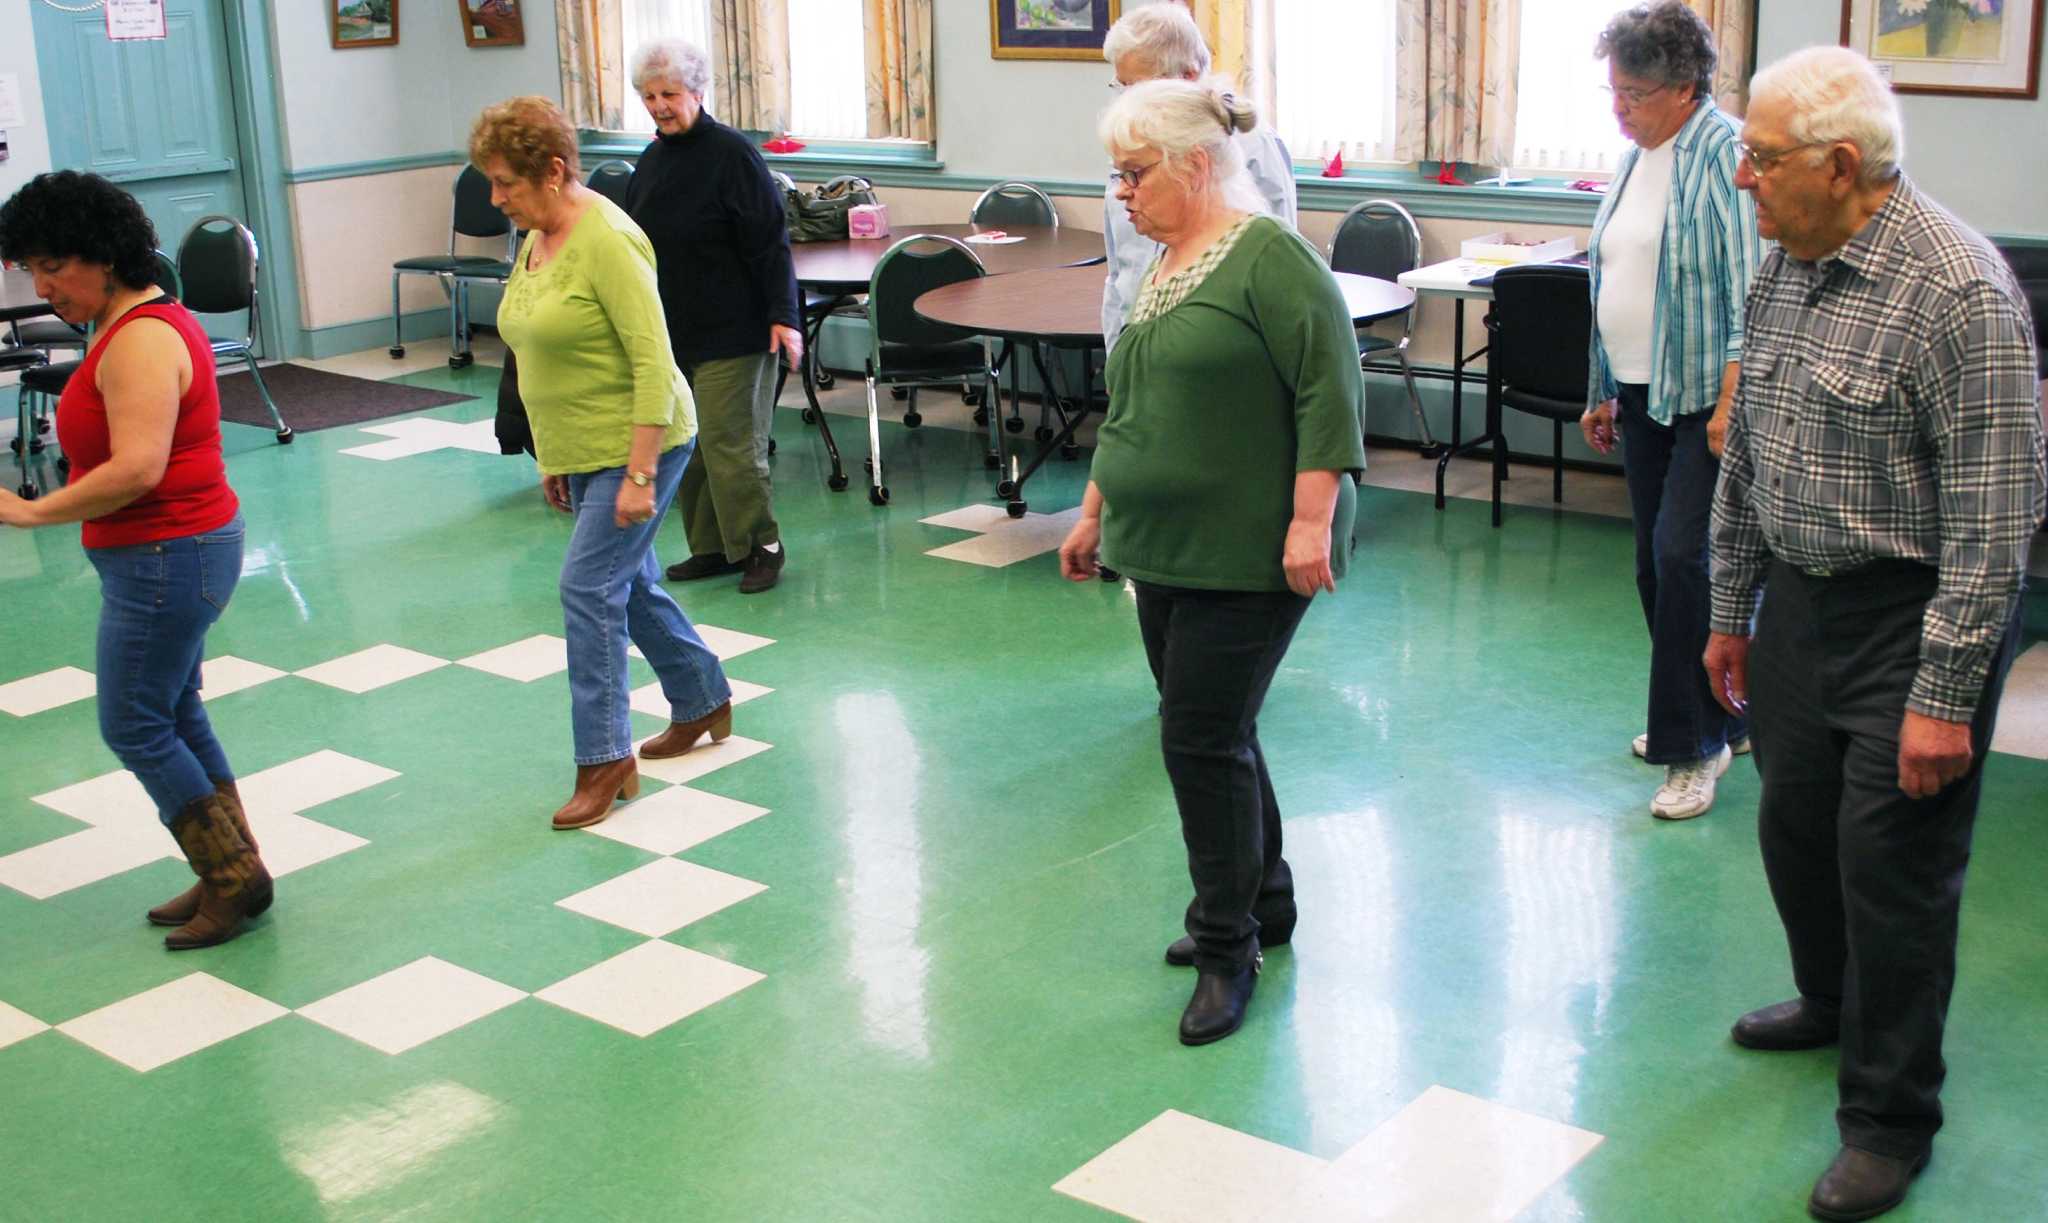 New Milford Senior Center’s expansion remains in early stages